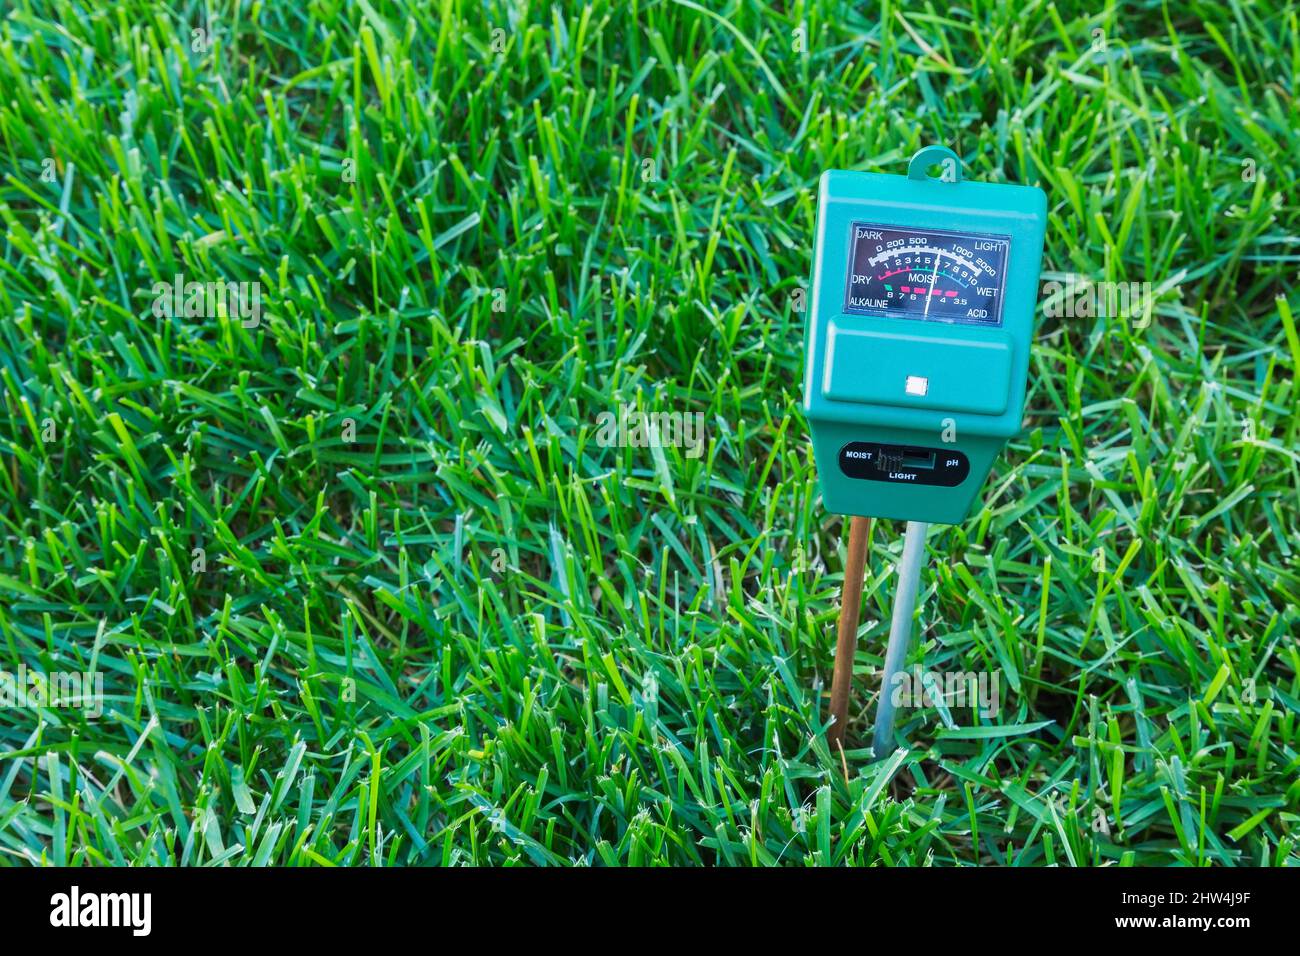 3 in 1 luminance, moisture and pH meter indicating soil condition of Poa pratensis  - Kentucky Bluegrass lawn is moist. Stock Photo